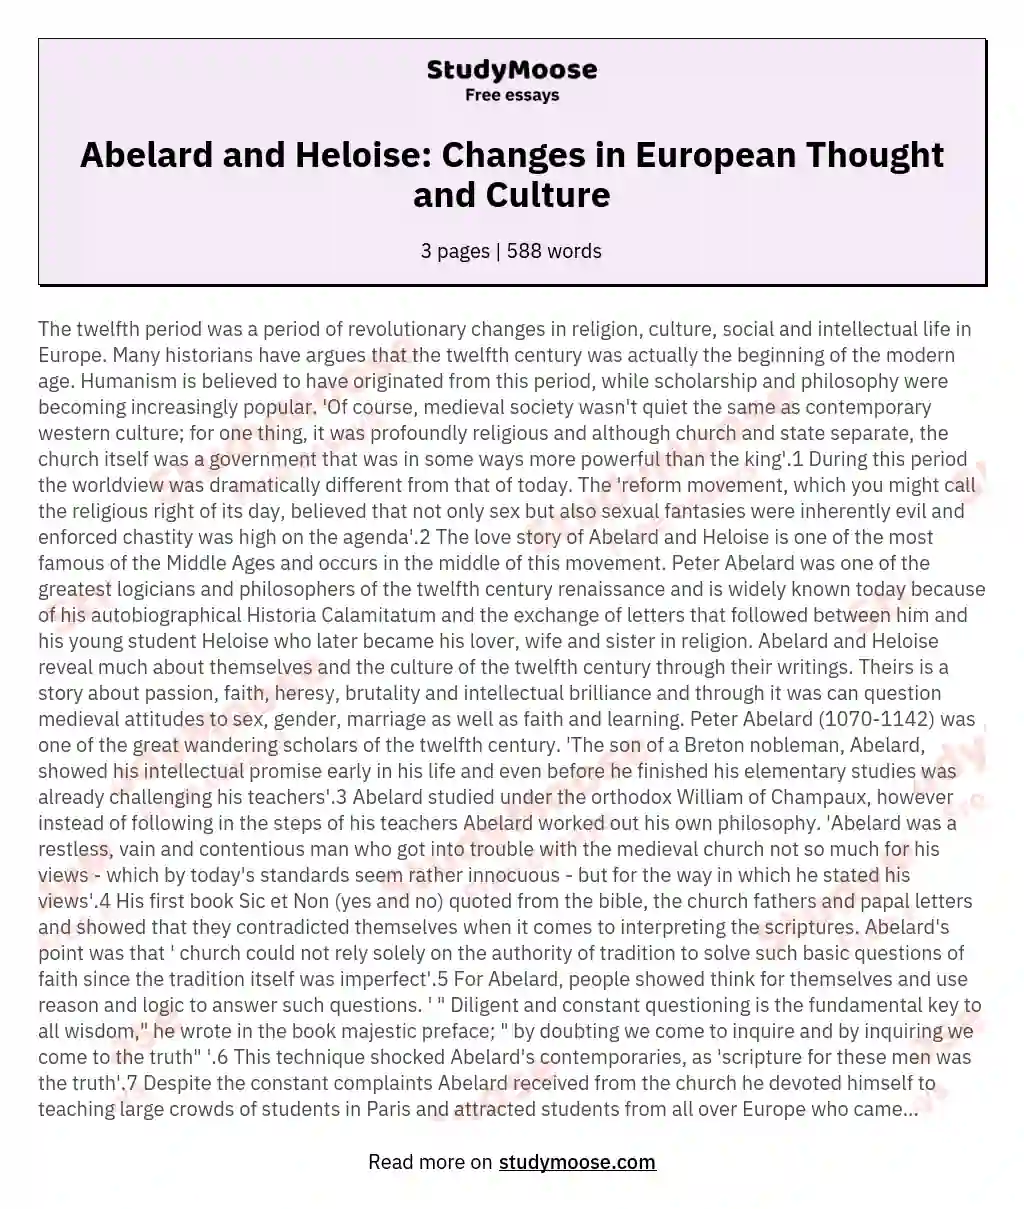 Abelard and Heloise: Changes in European Thought and Culture essay